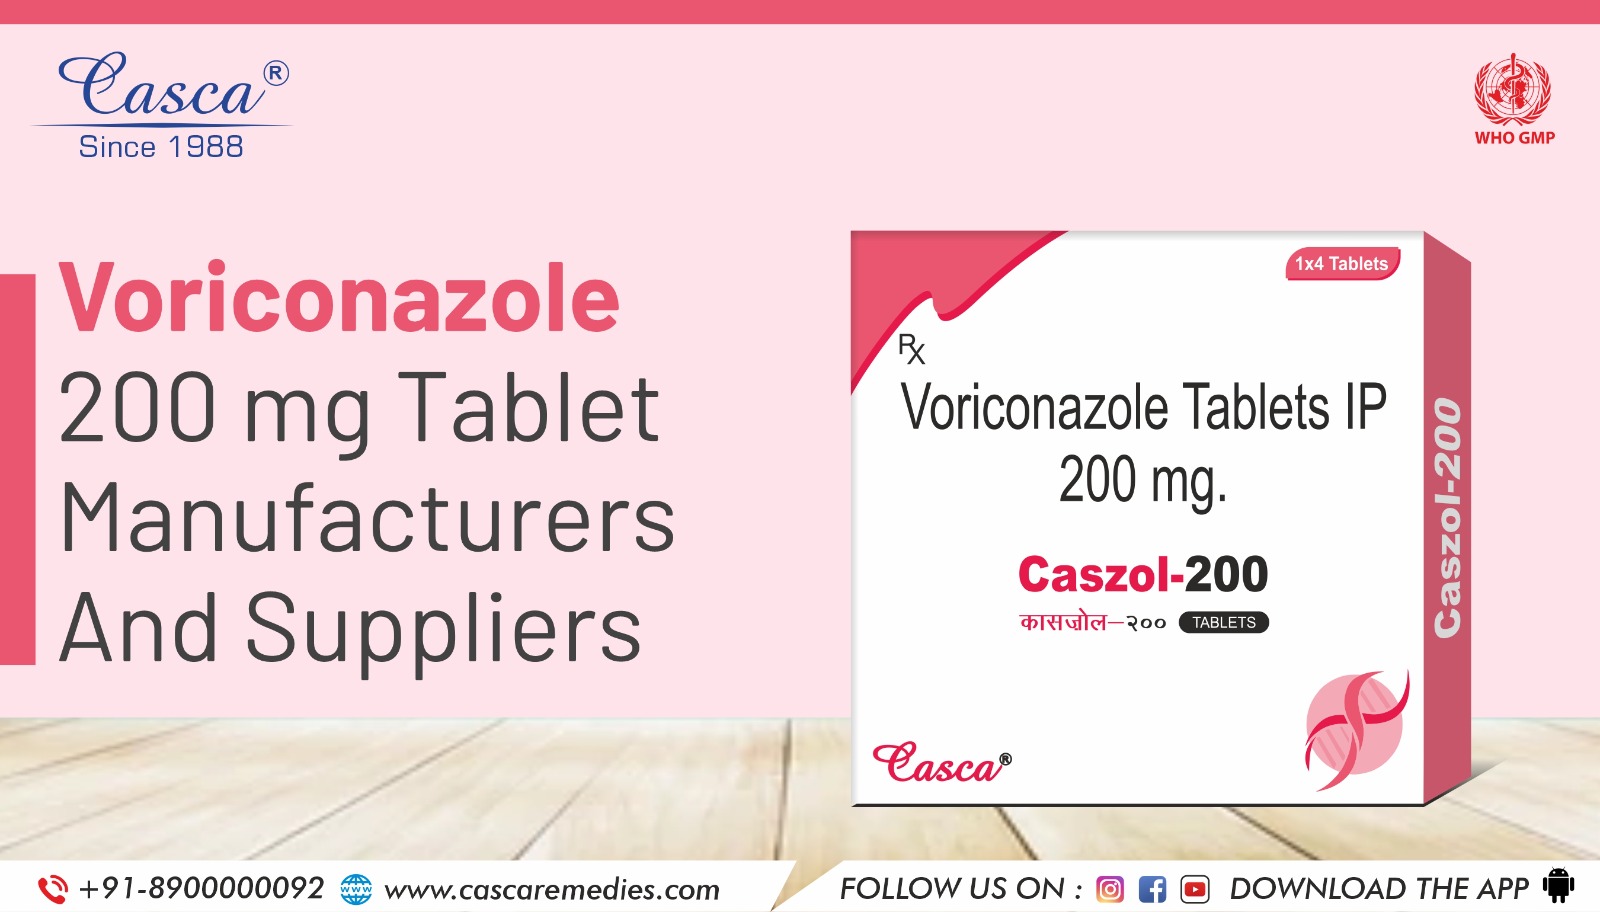 Voriconazole 200 mg Tablet Manufacturers and Suppliers